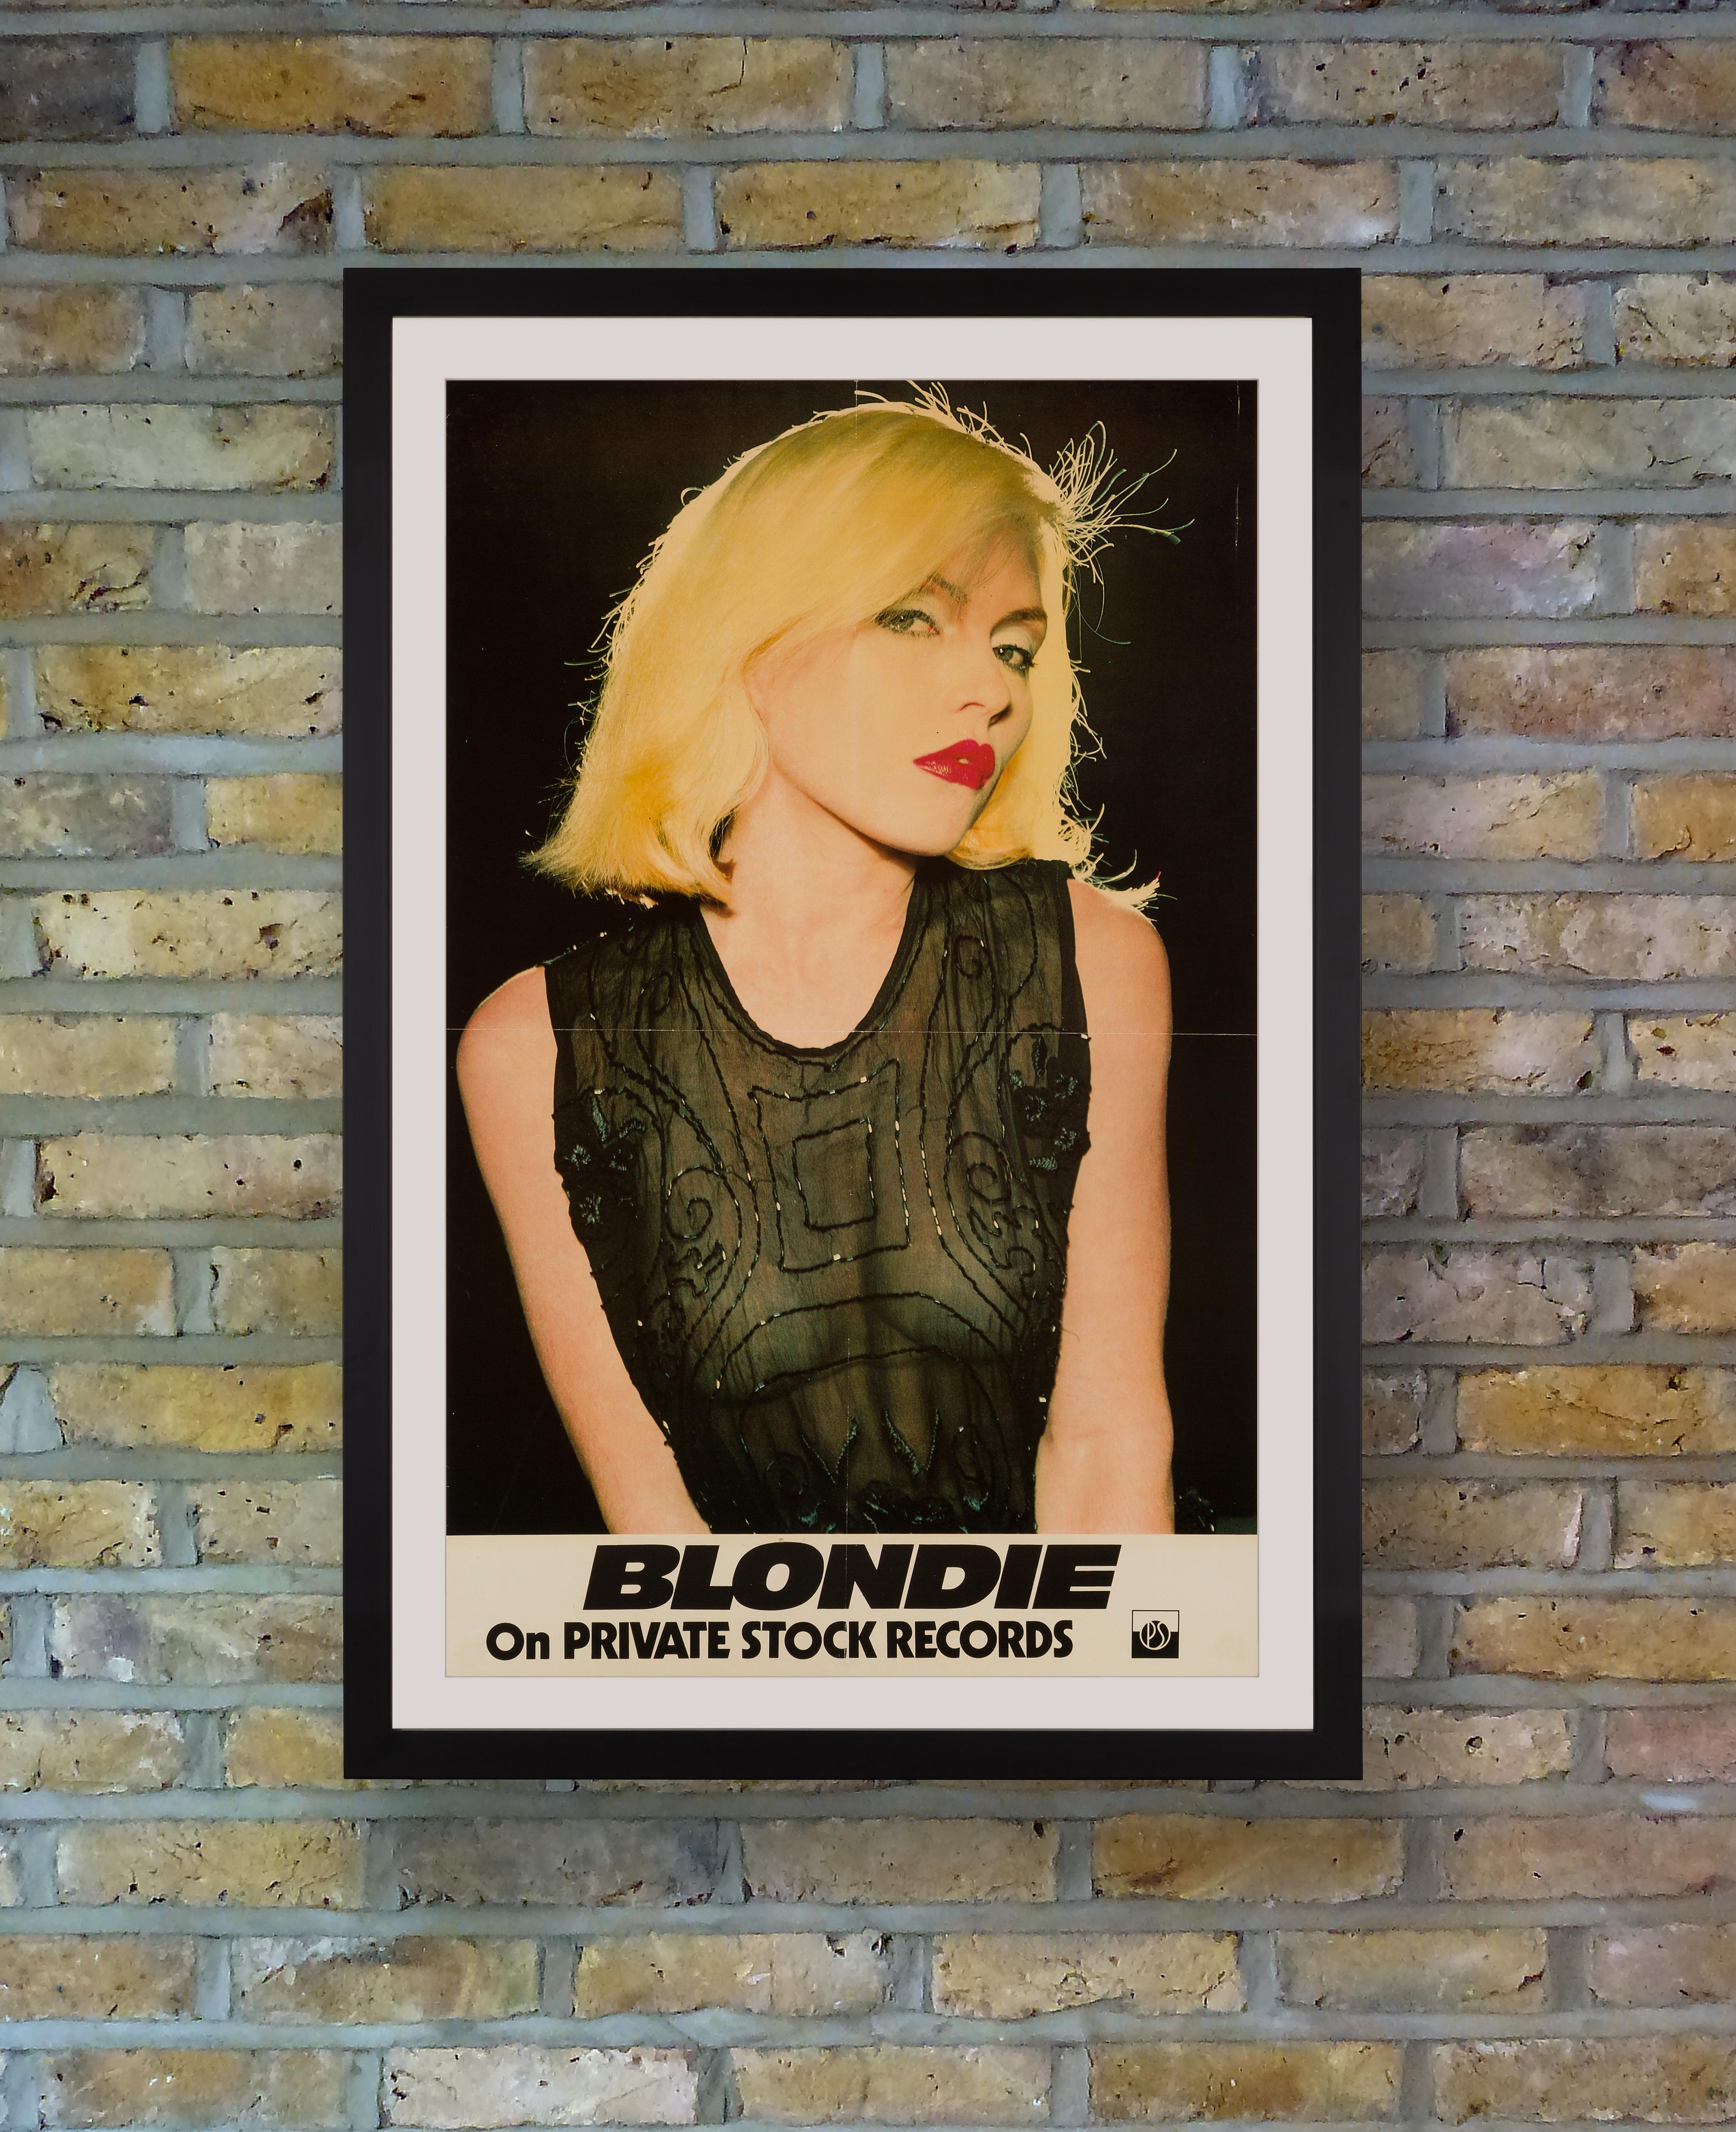 A scarce promotional poster issued by New York label Private Stock Records in support of Blondie's eponymous debut album, released in December 1976. A holy grail item for Blondie collectors, Debbie Harry reportedly detested the trashy image of